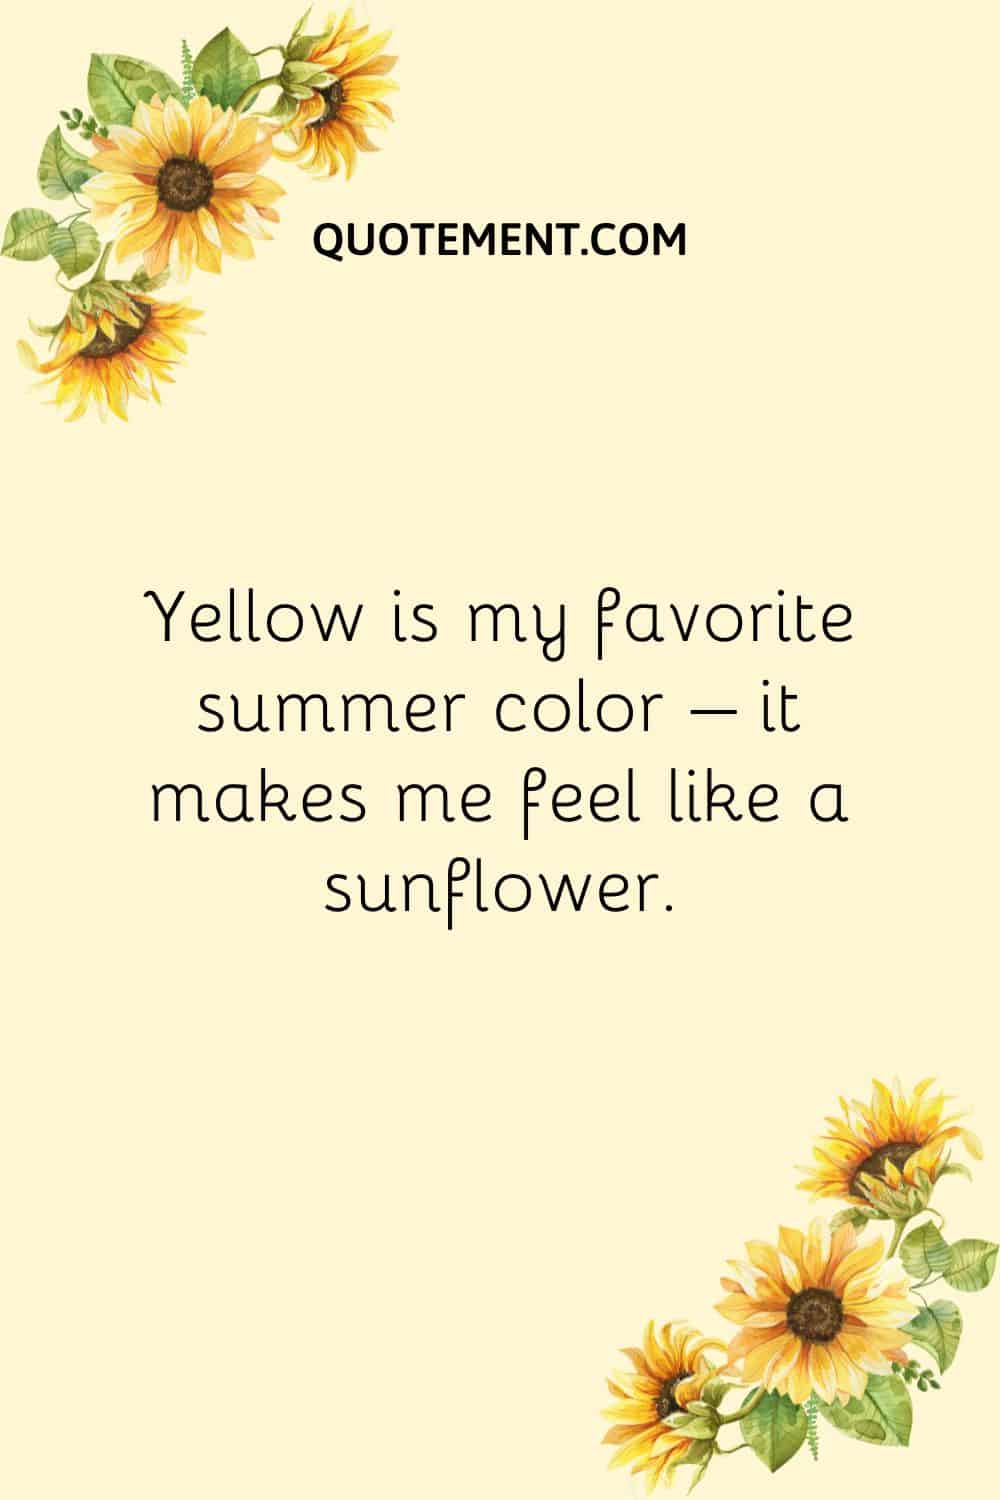 Yellow is my favorite summer color – it makes me feel like a sunflower.